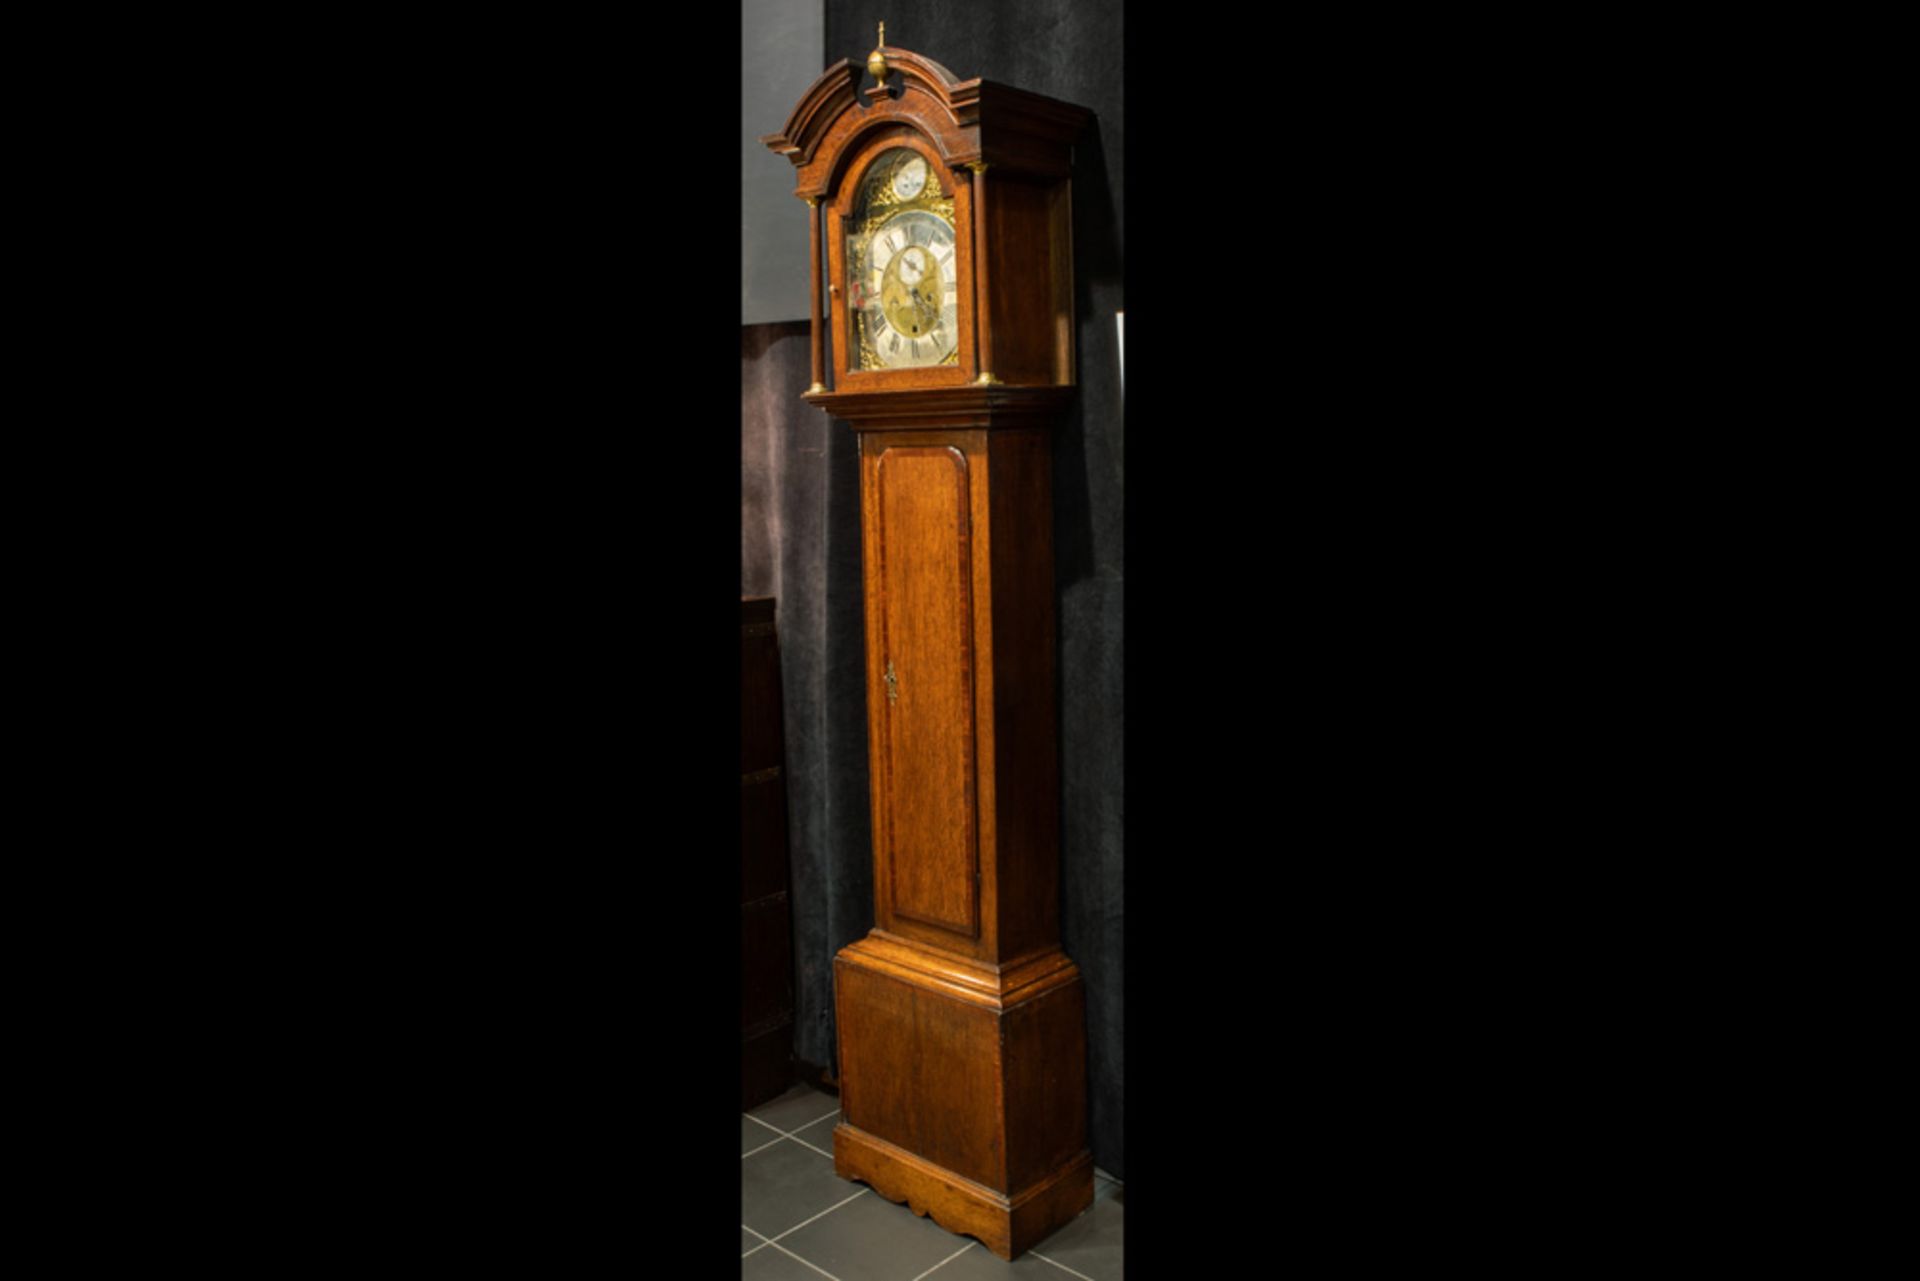 antique English longcase clock with case in oak and mahogany and with a "John ... - Sunderland" - Bild 2 aus 3